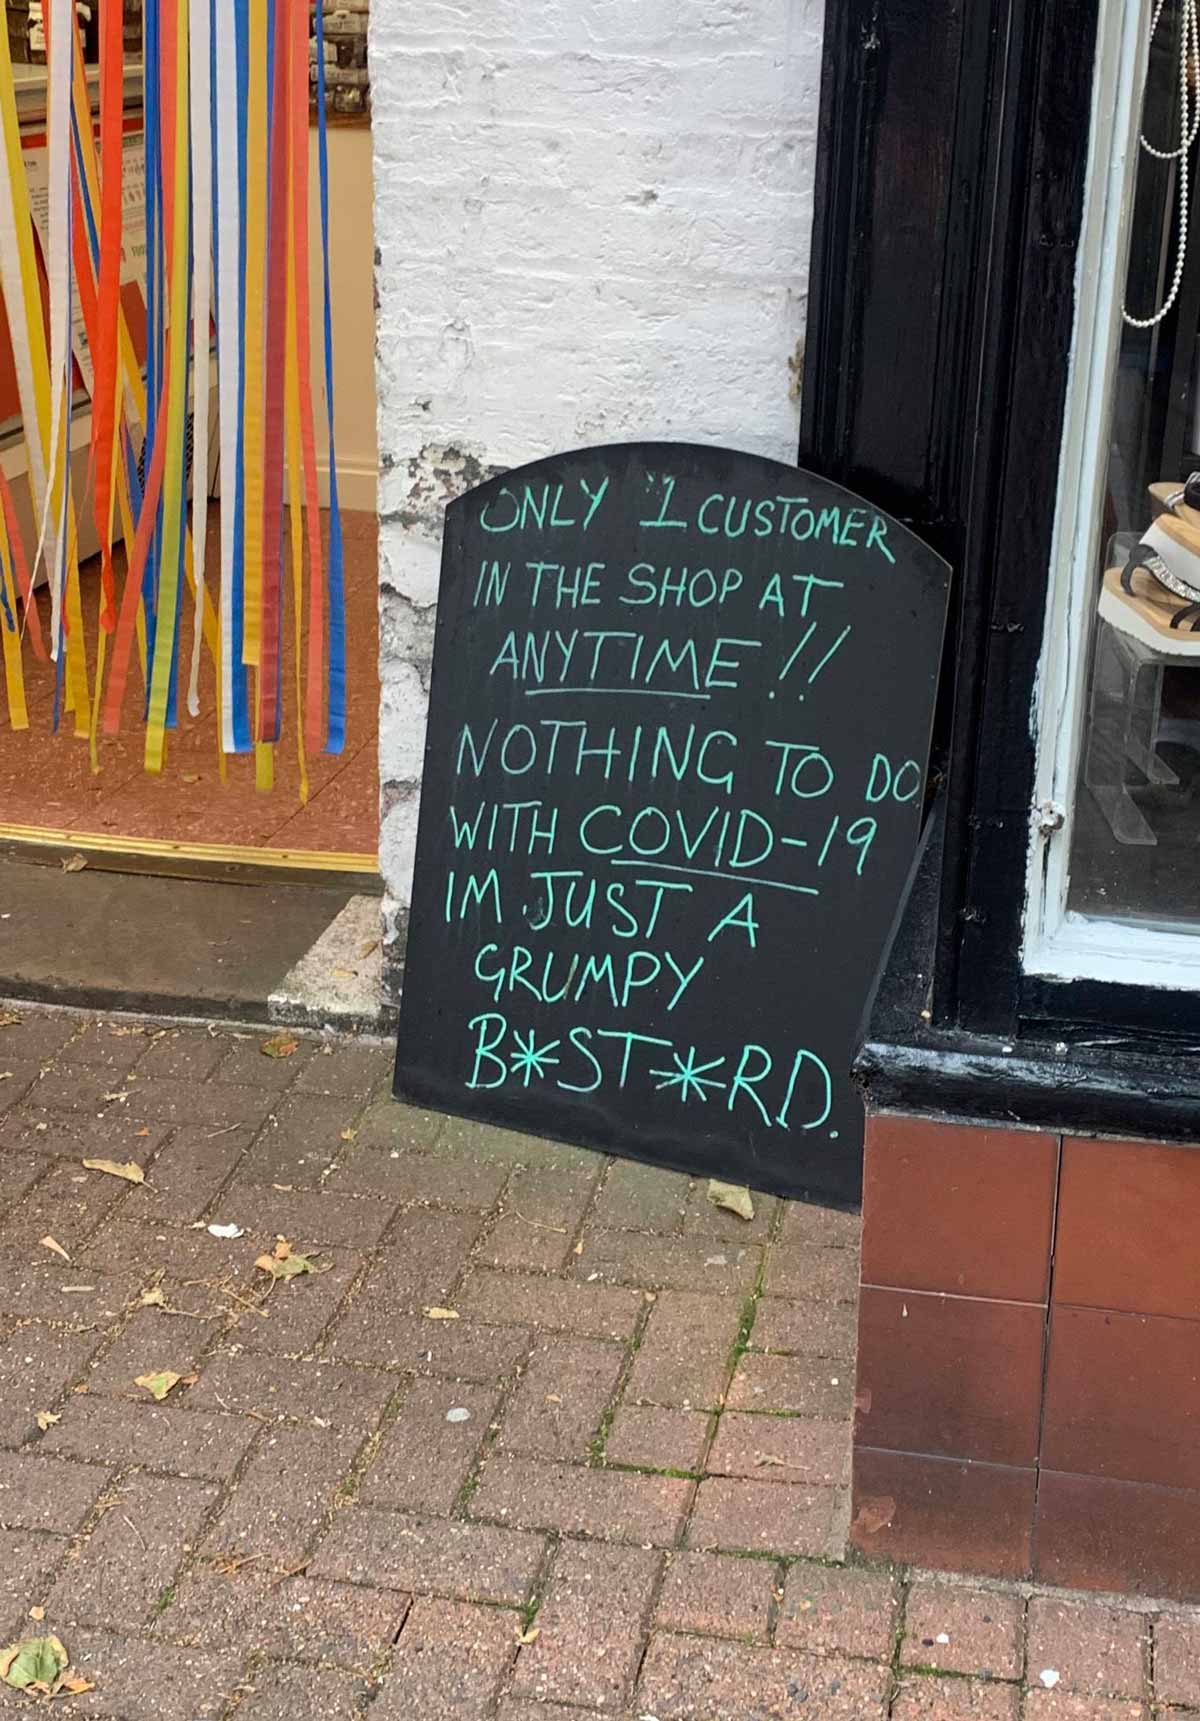 Funny photo of a sign outside of a store that says 'only 1 customer in the shop at anytime!! Nothing to do with Covid'19 I'm just a grumpy bastard'